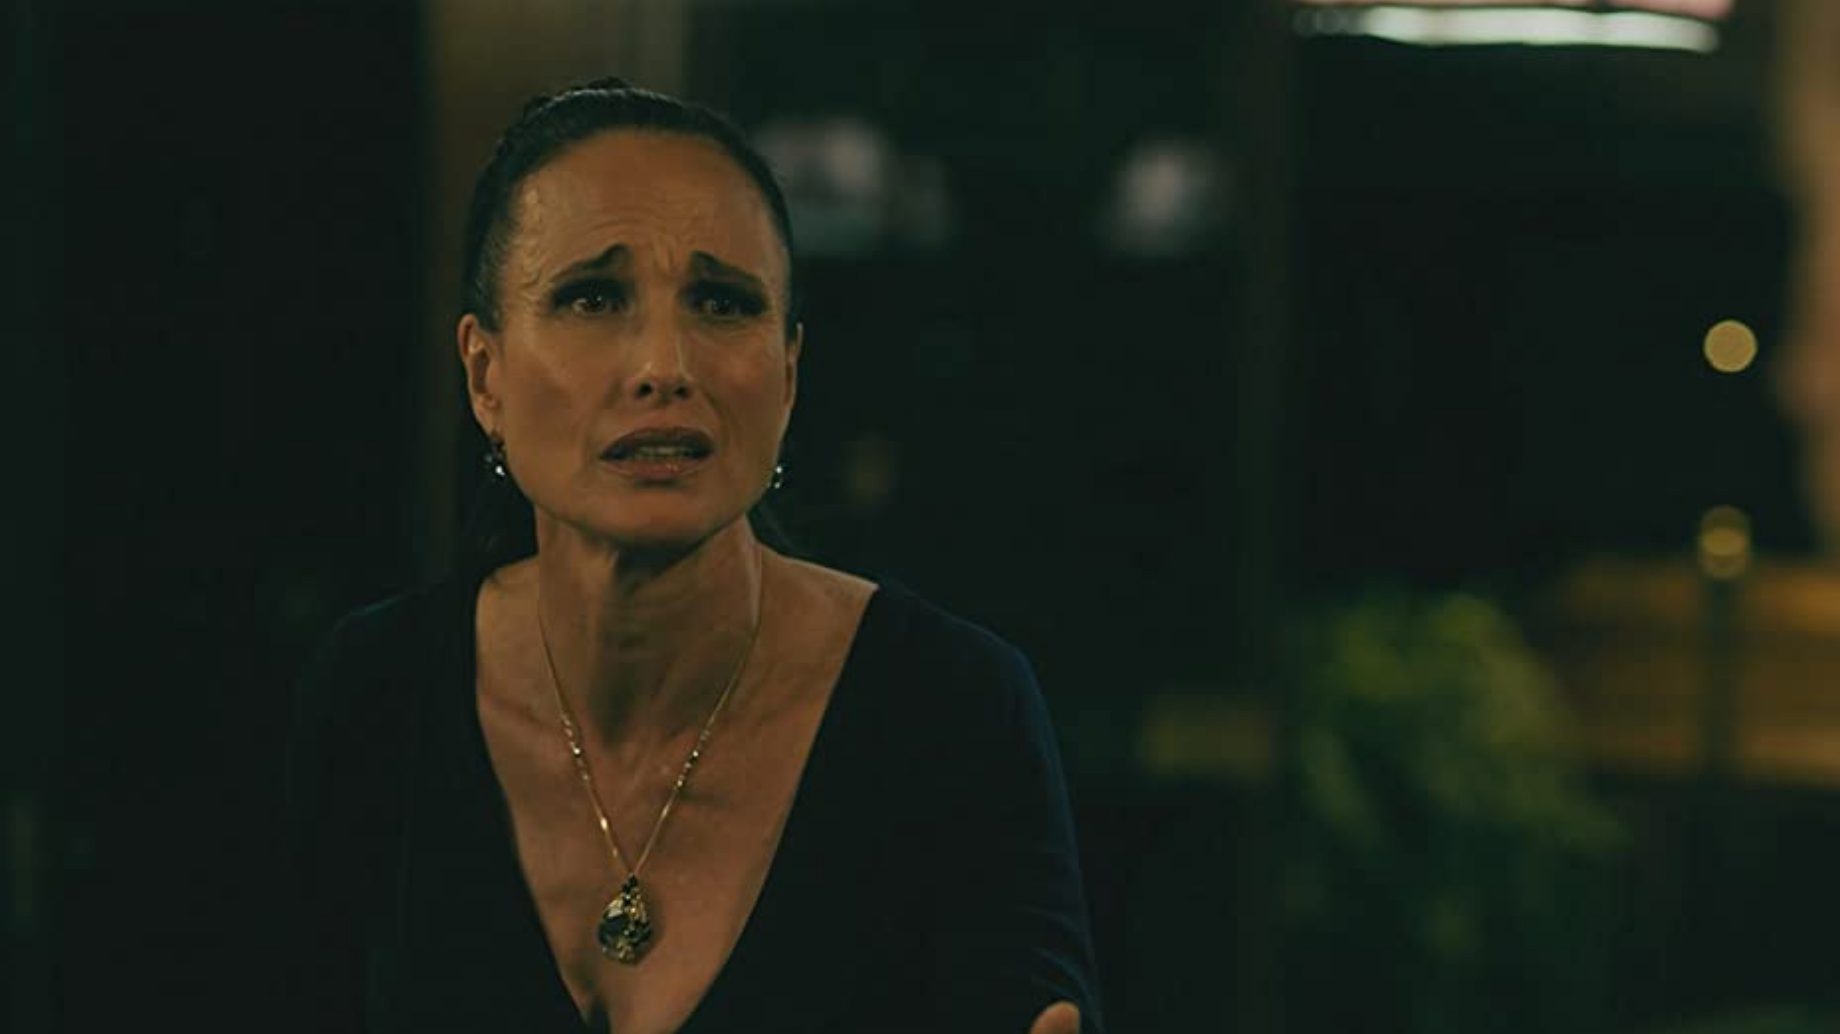 Andie MacDowell in Ready or Not